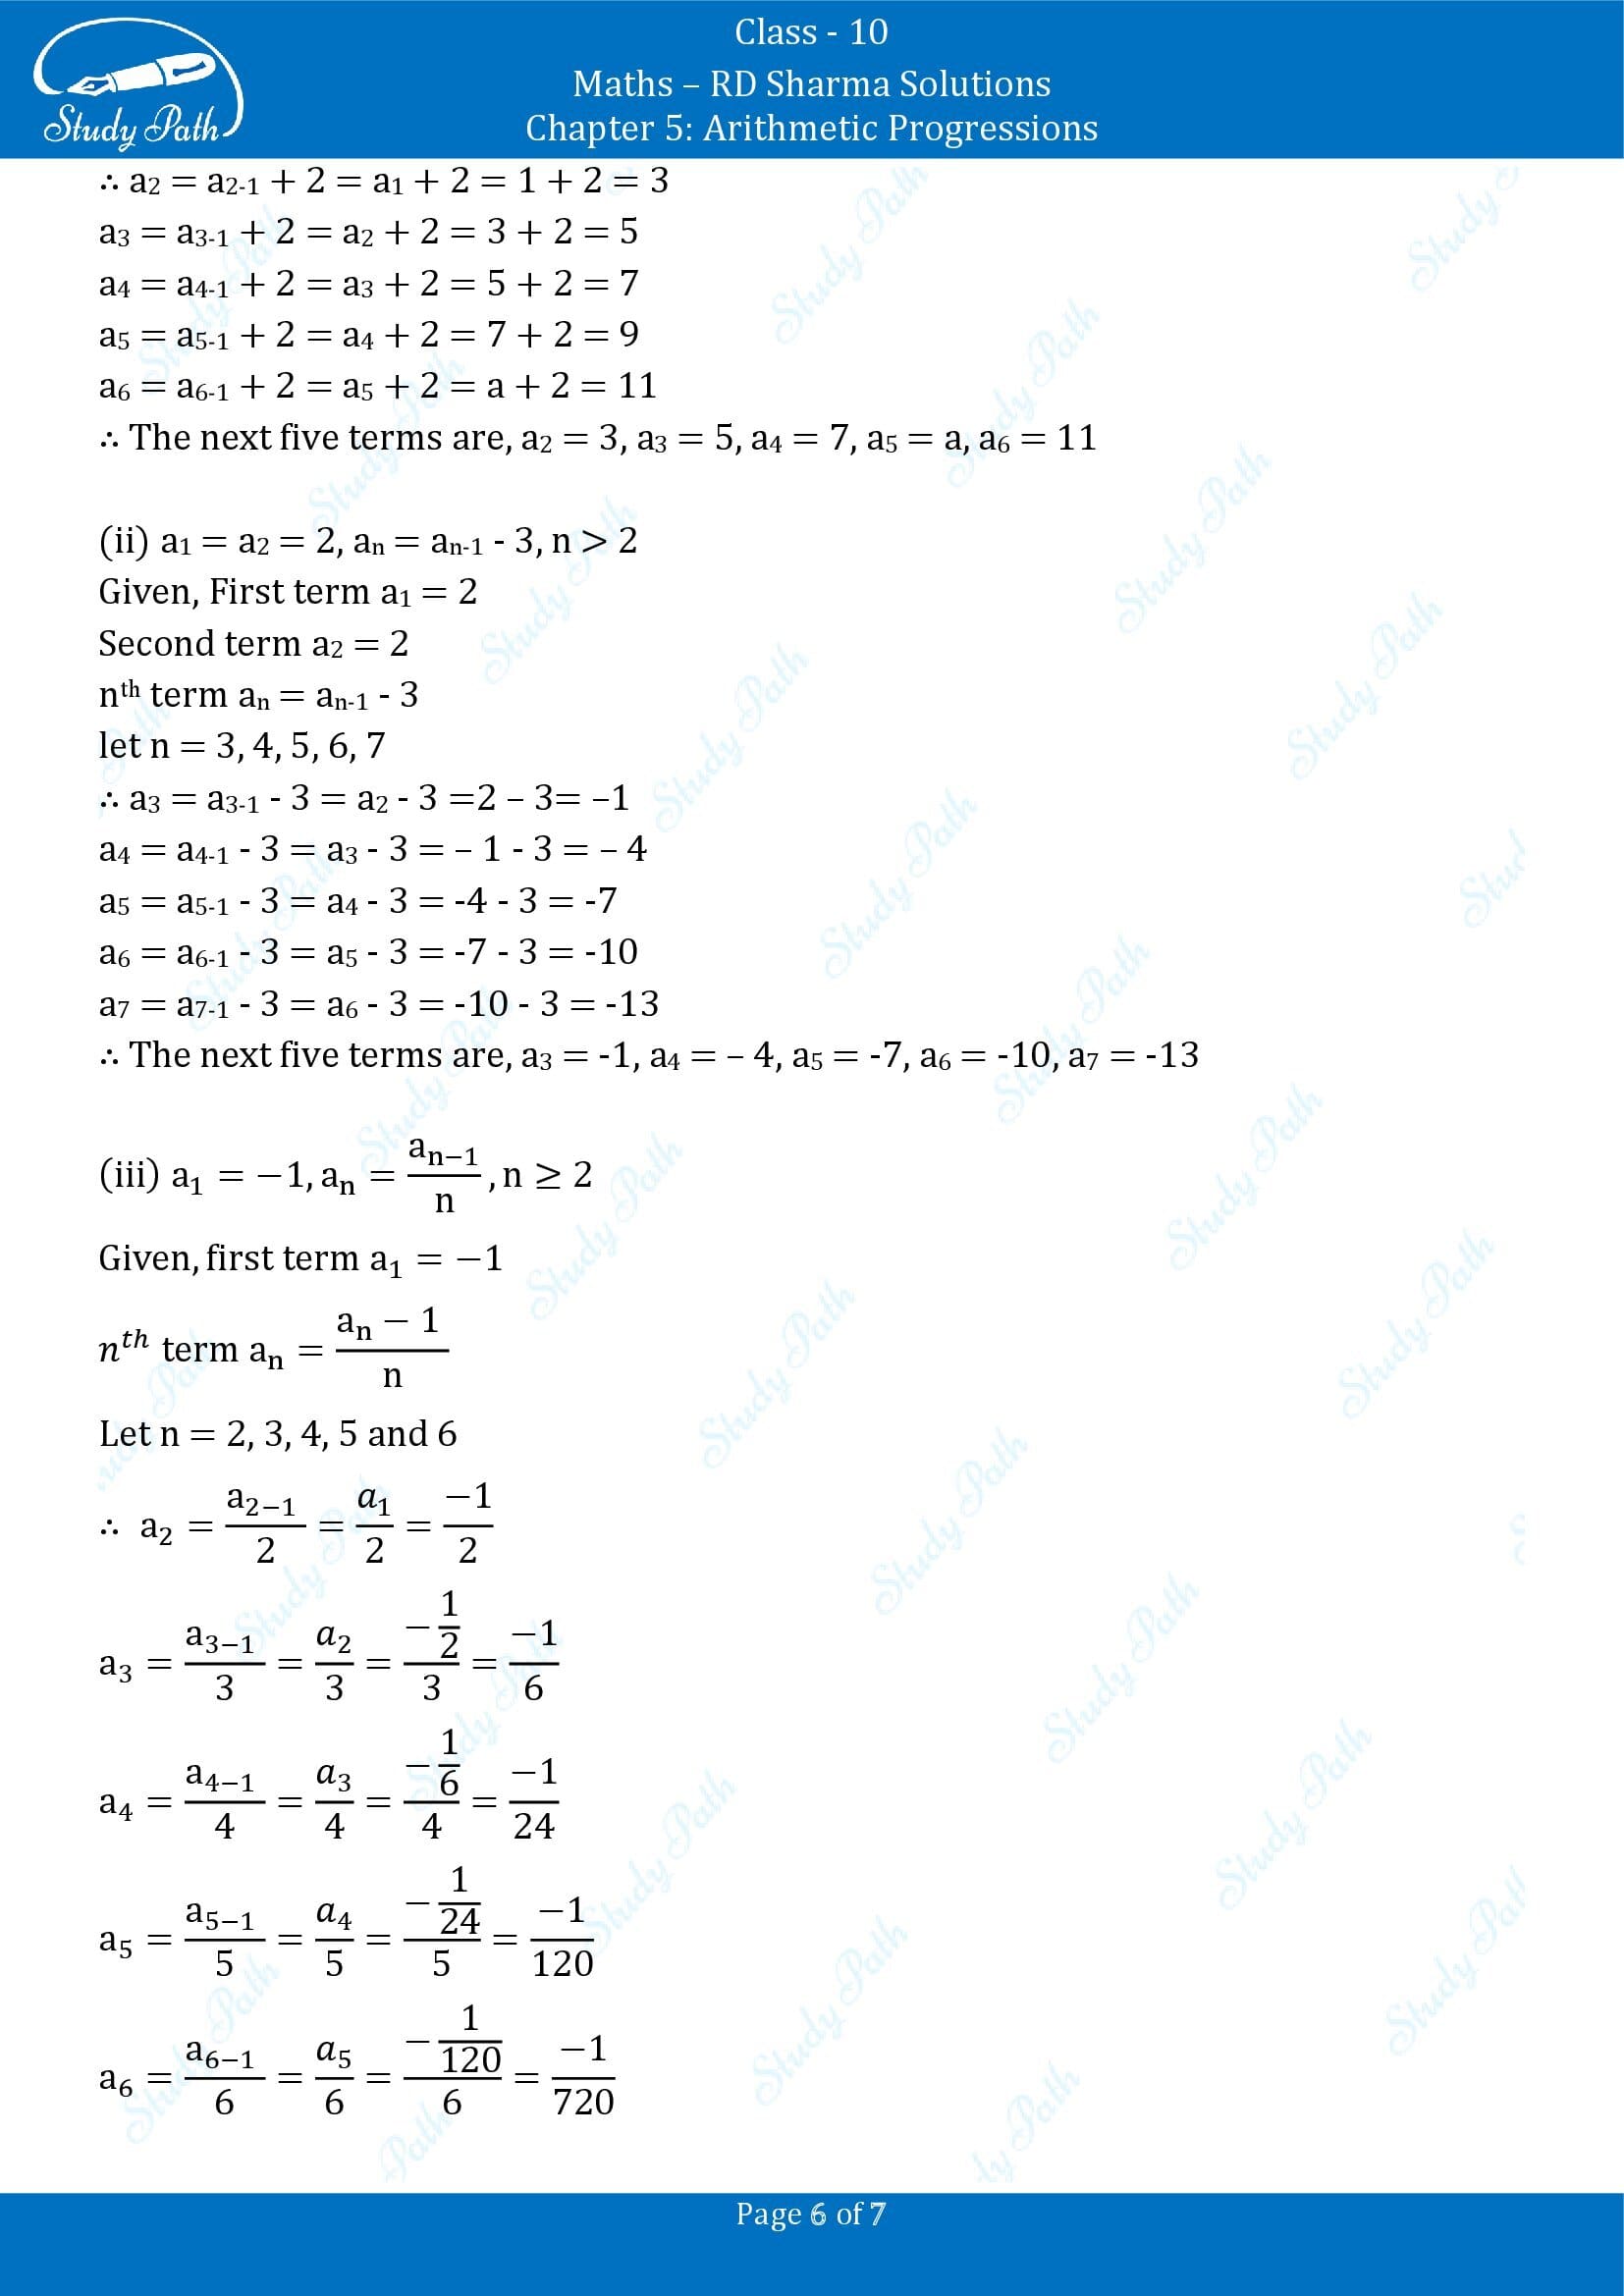 RD Sharma Solutions Class 10 Chapter 5 Arithmetic Progressions Exercise 5.1 00006